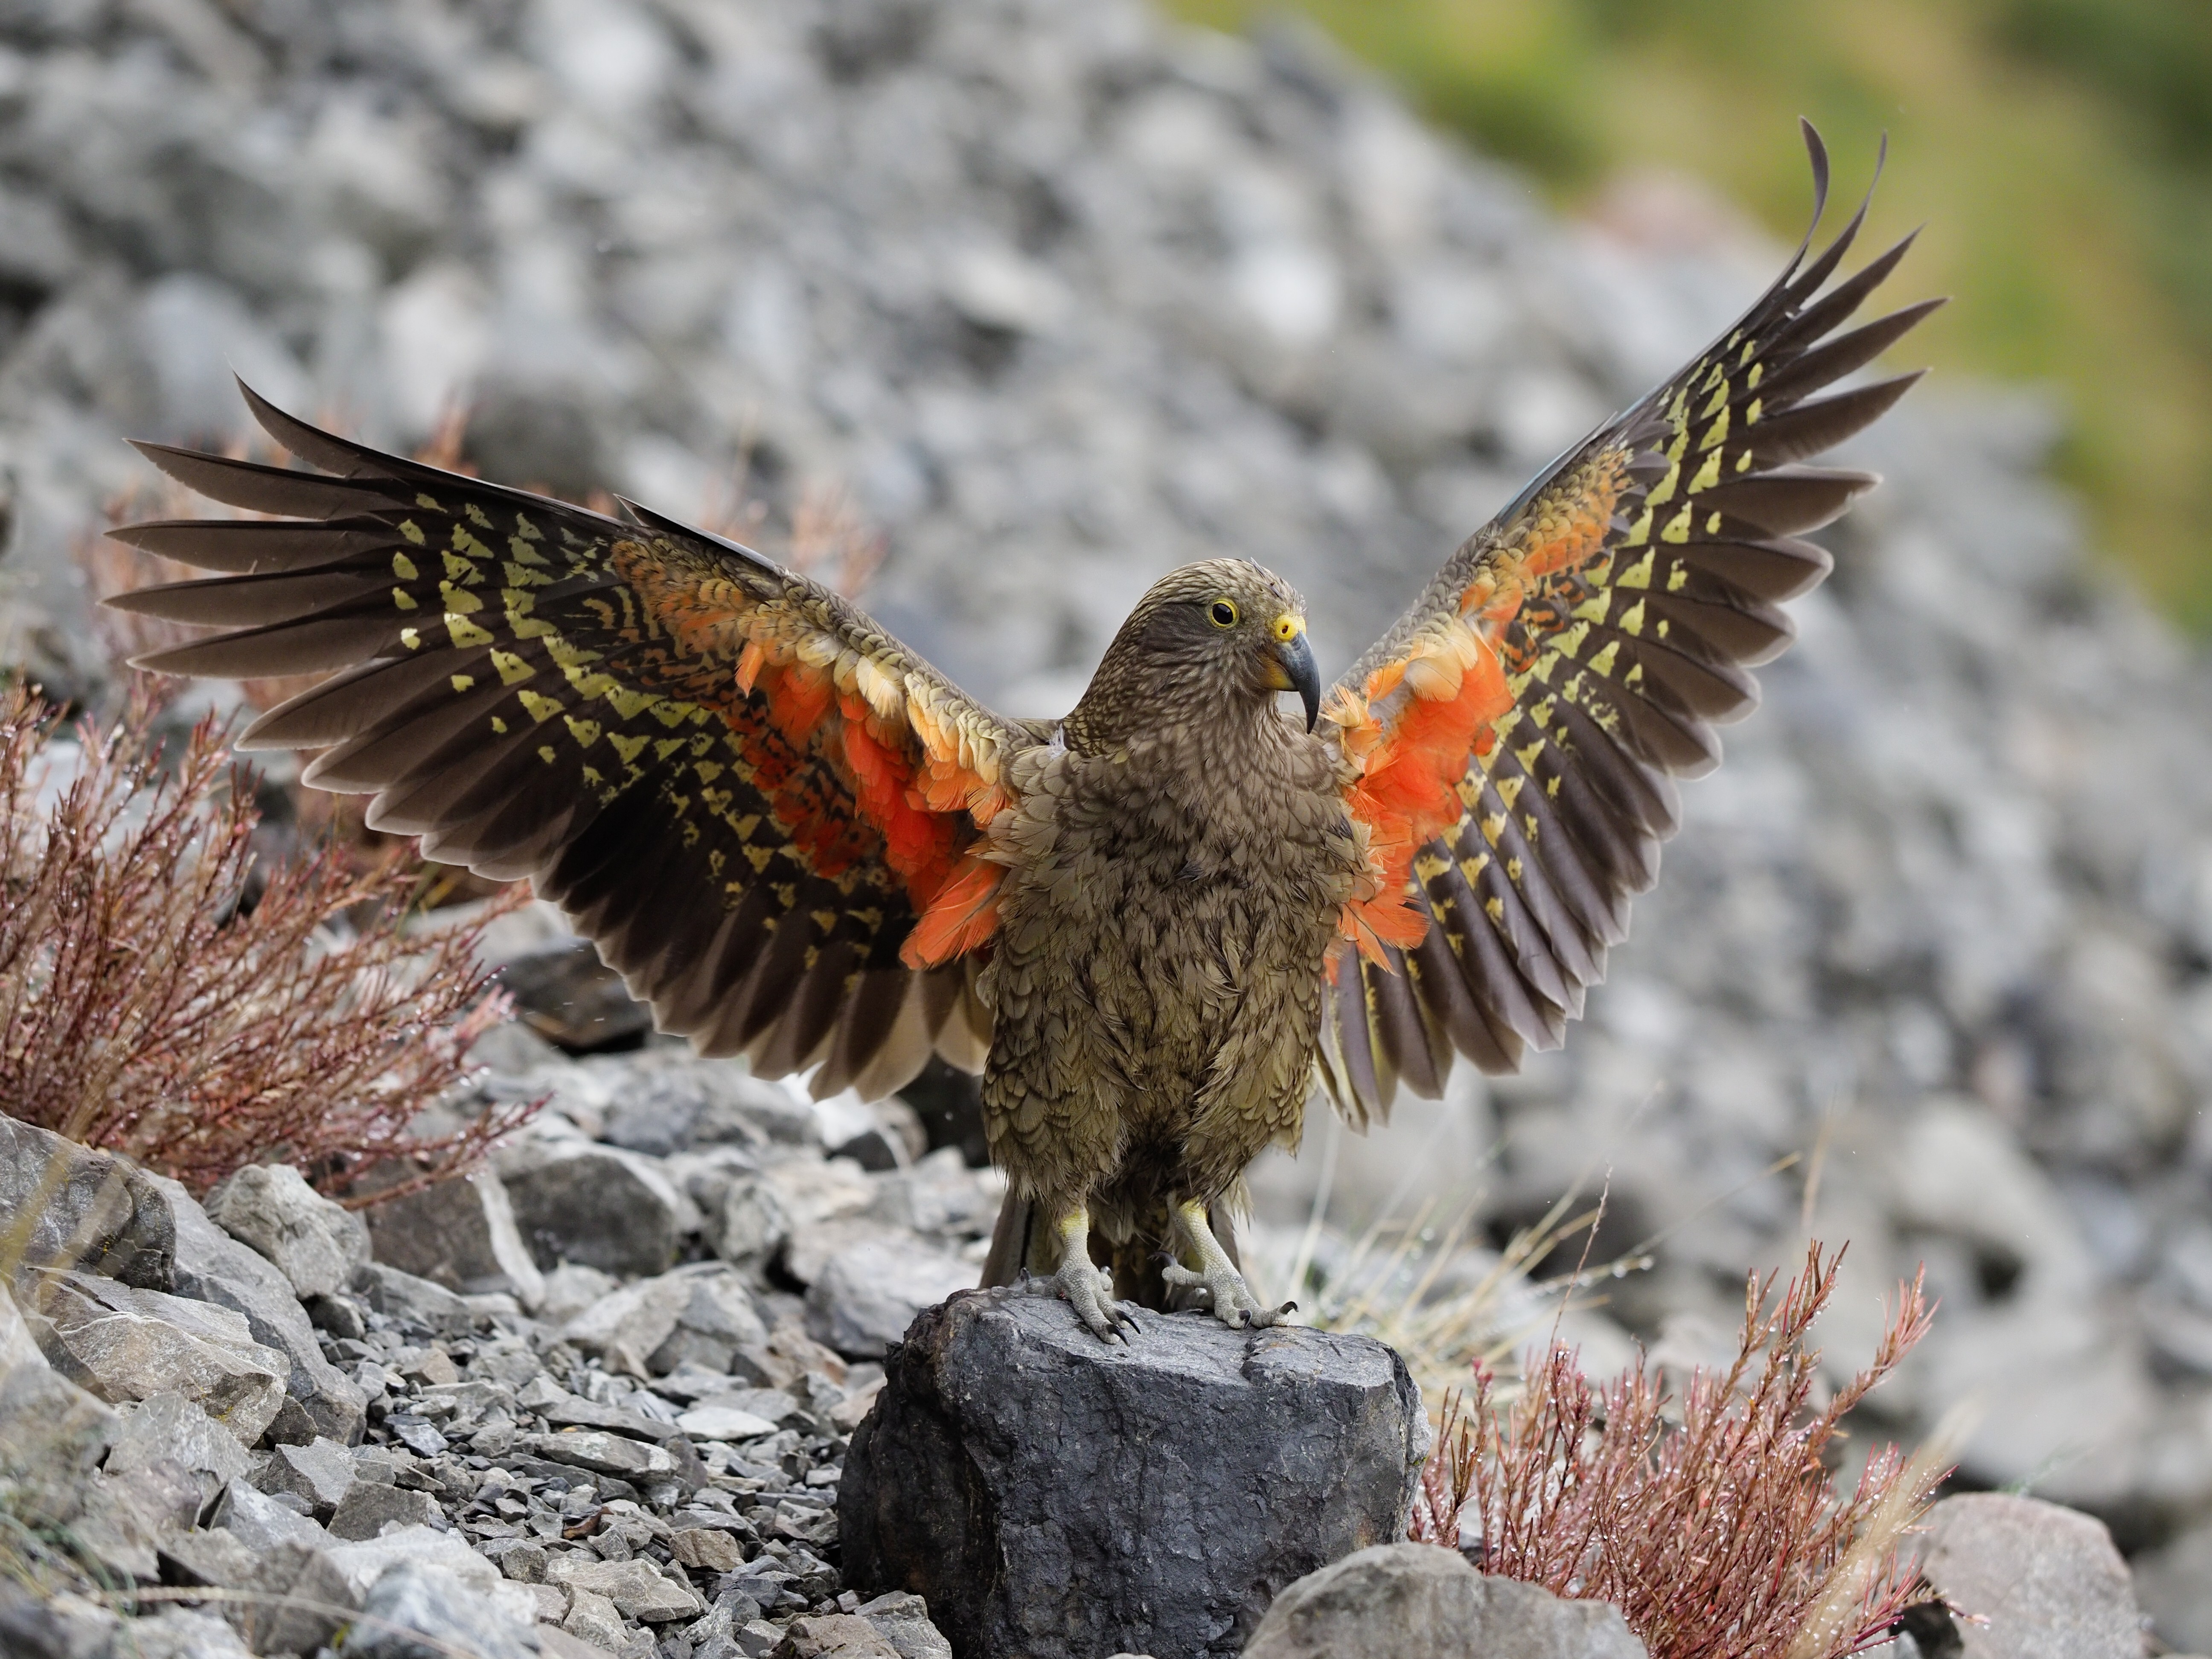 In honour of World Parrot Day, let's take a look at the kea.